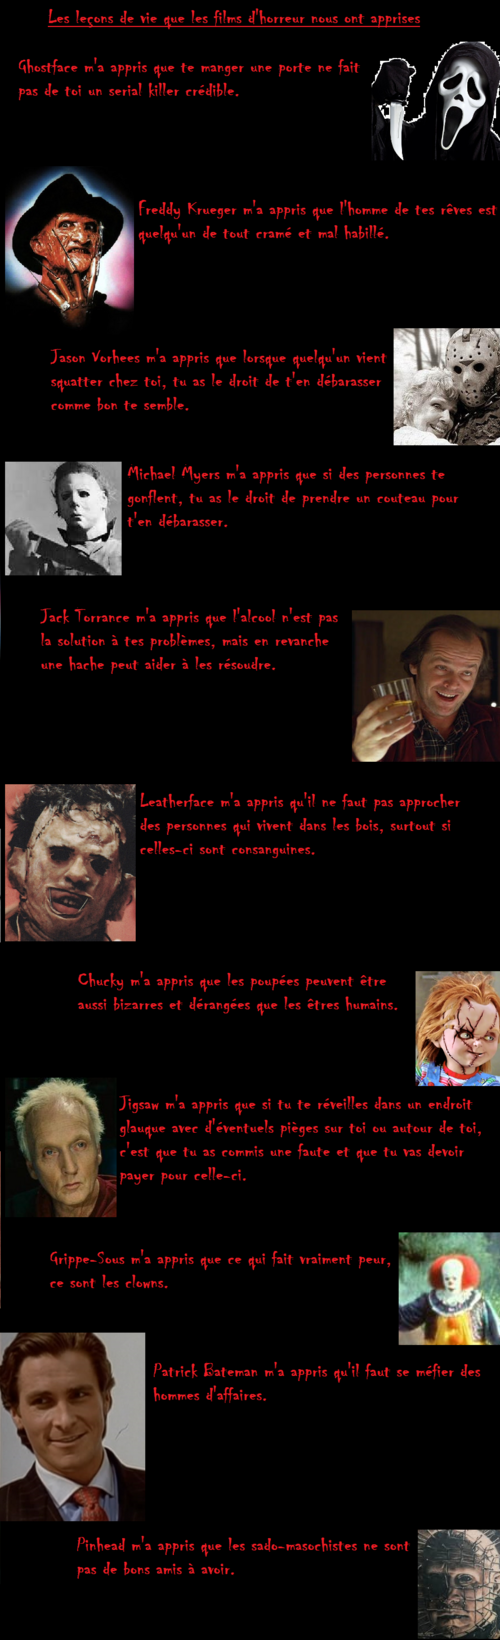 The life lessons that horror movies have taught us (humor version)